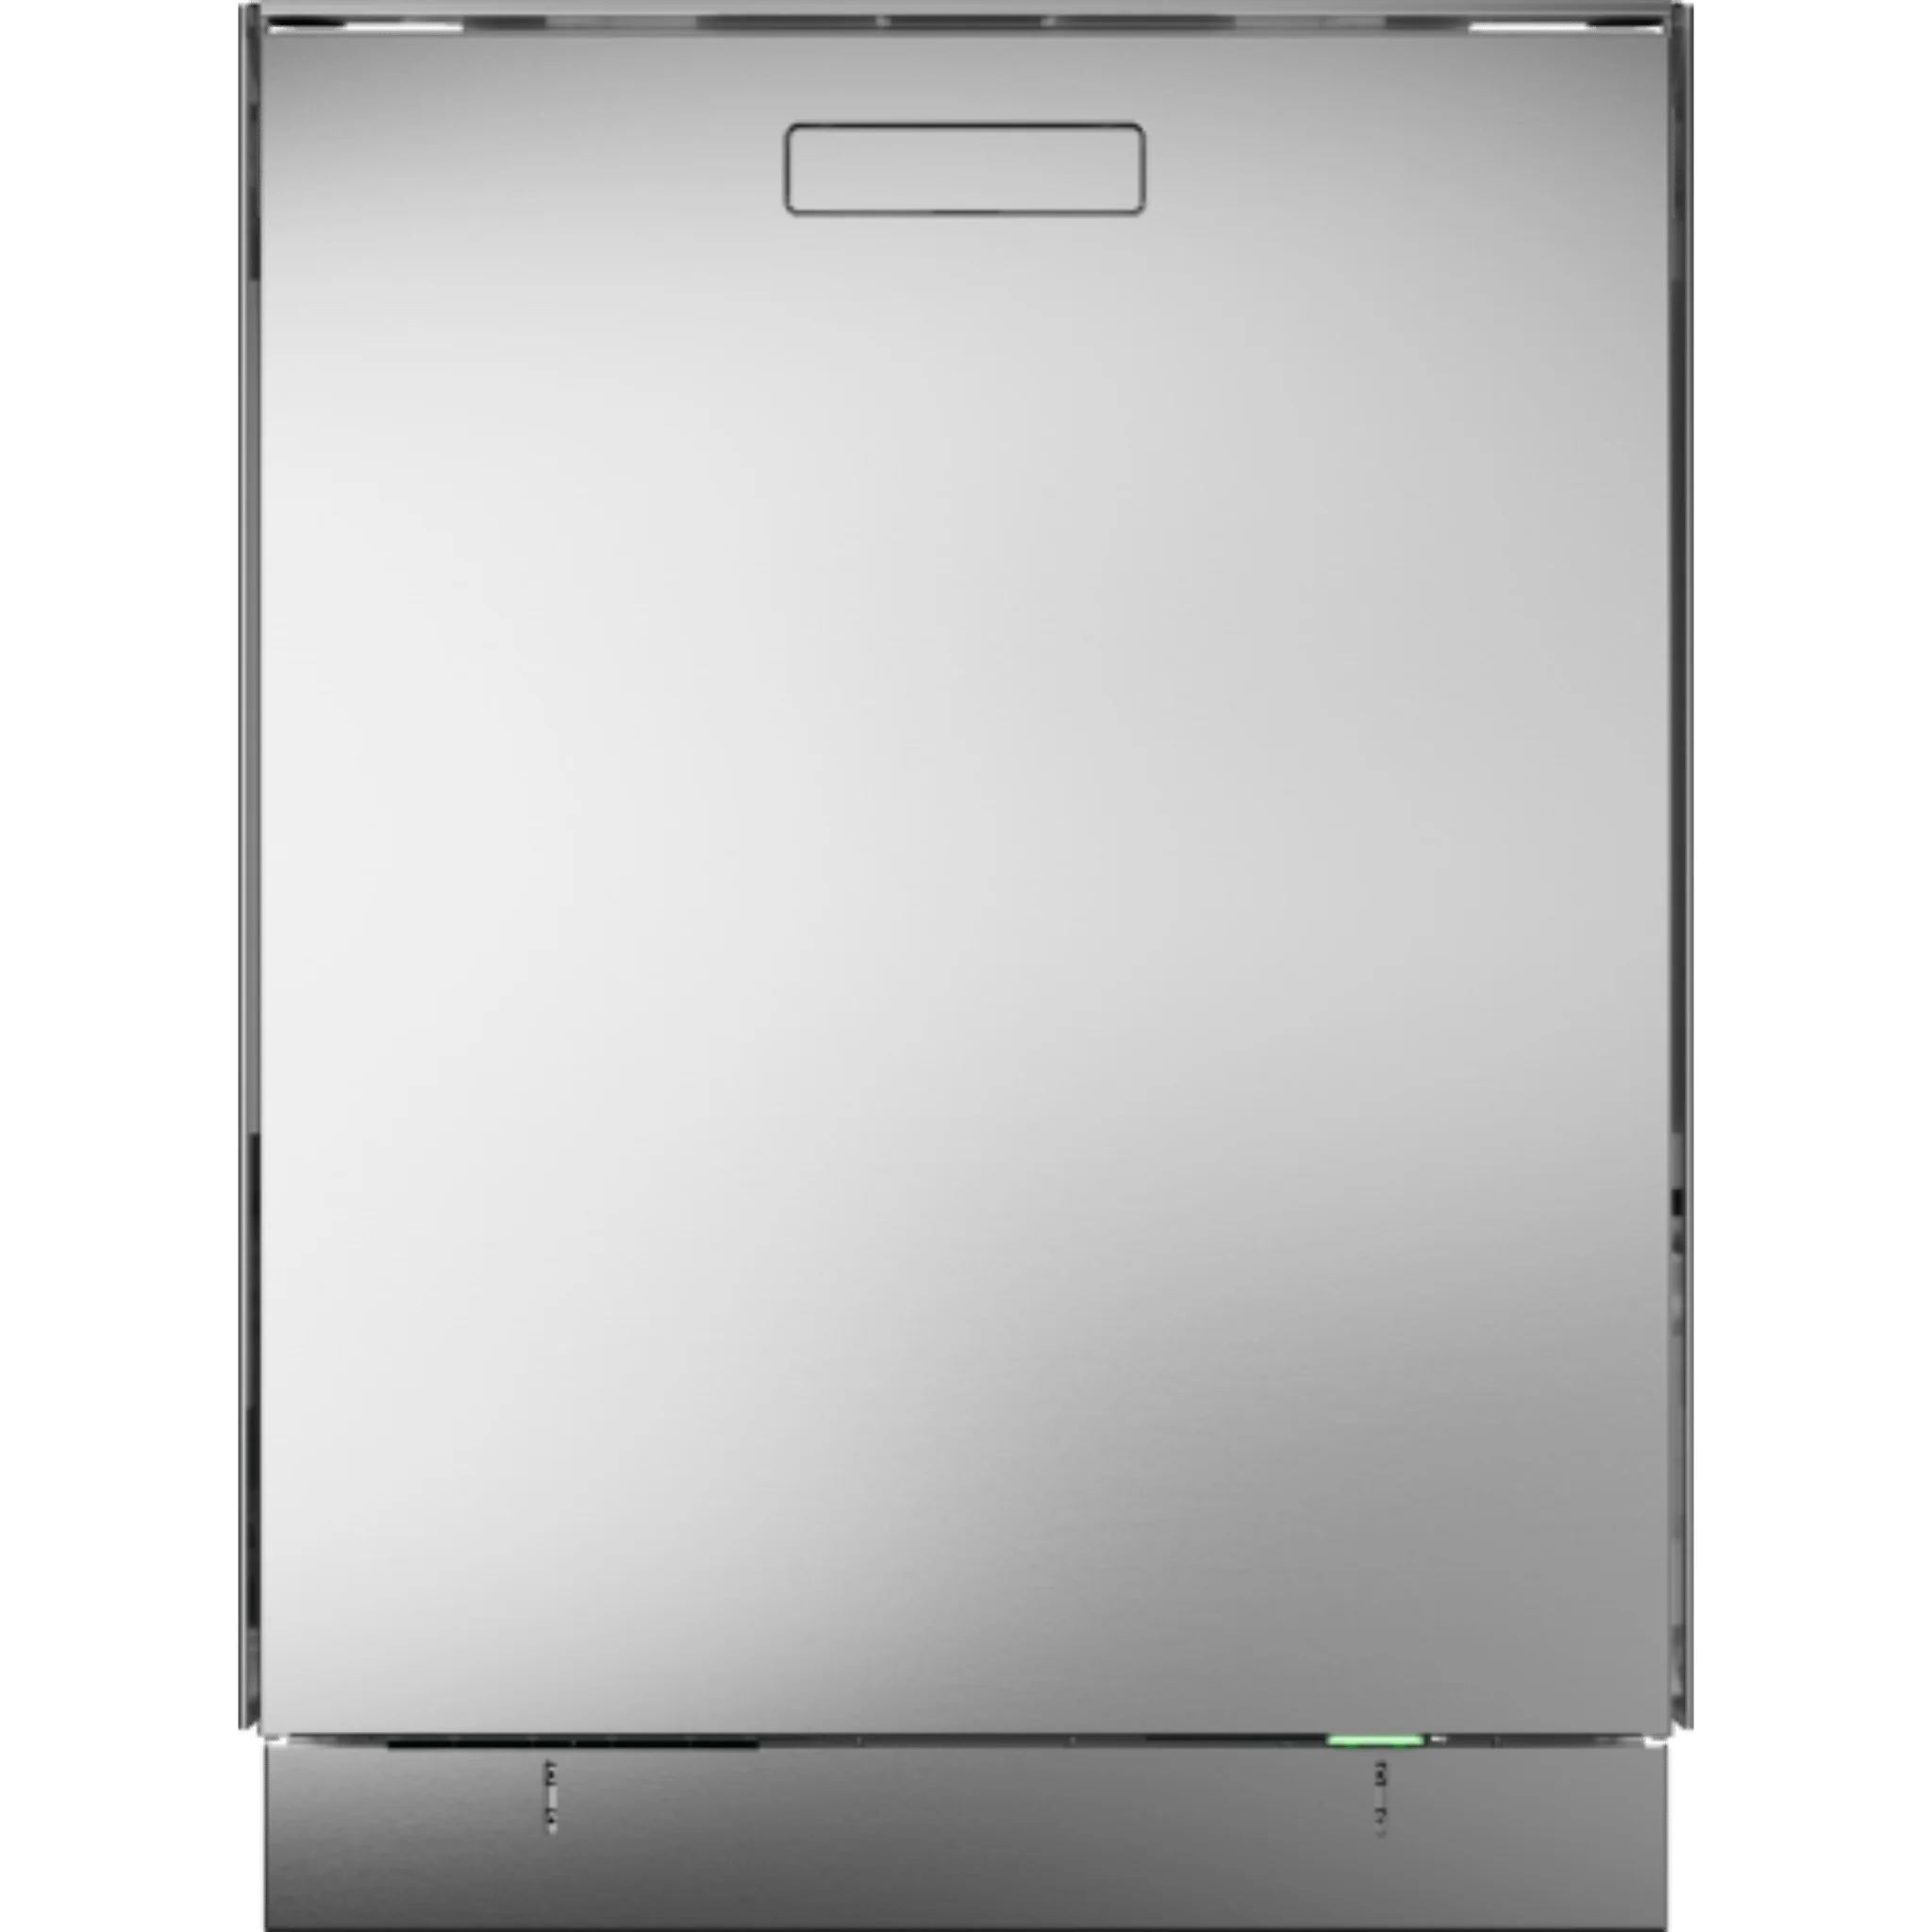 Asko Logic 24 Inch Wide 16 Place Setting Built-In Top Control Dishwasher with Pocket Handle, Turbo Combi Drying™, and Auto Door Open Drying™ Dishwashers DBI564IS Luxury Appliances Direct